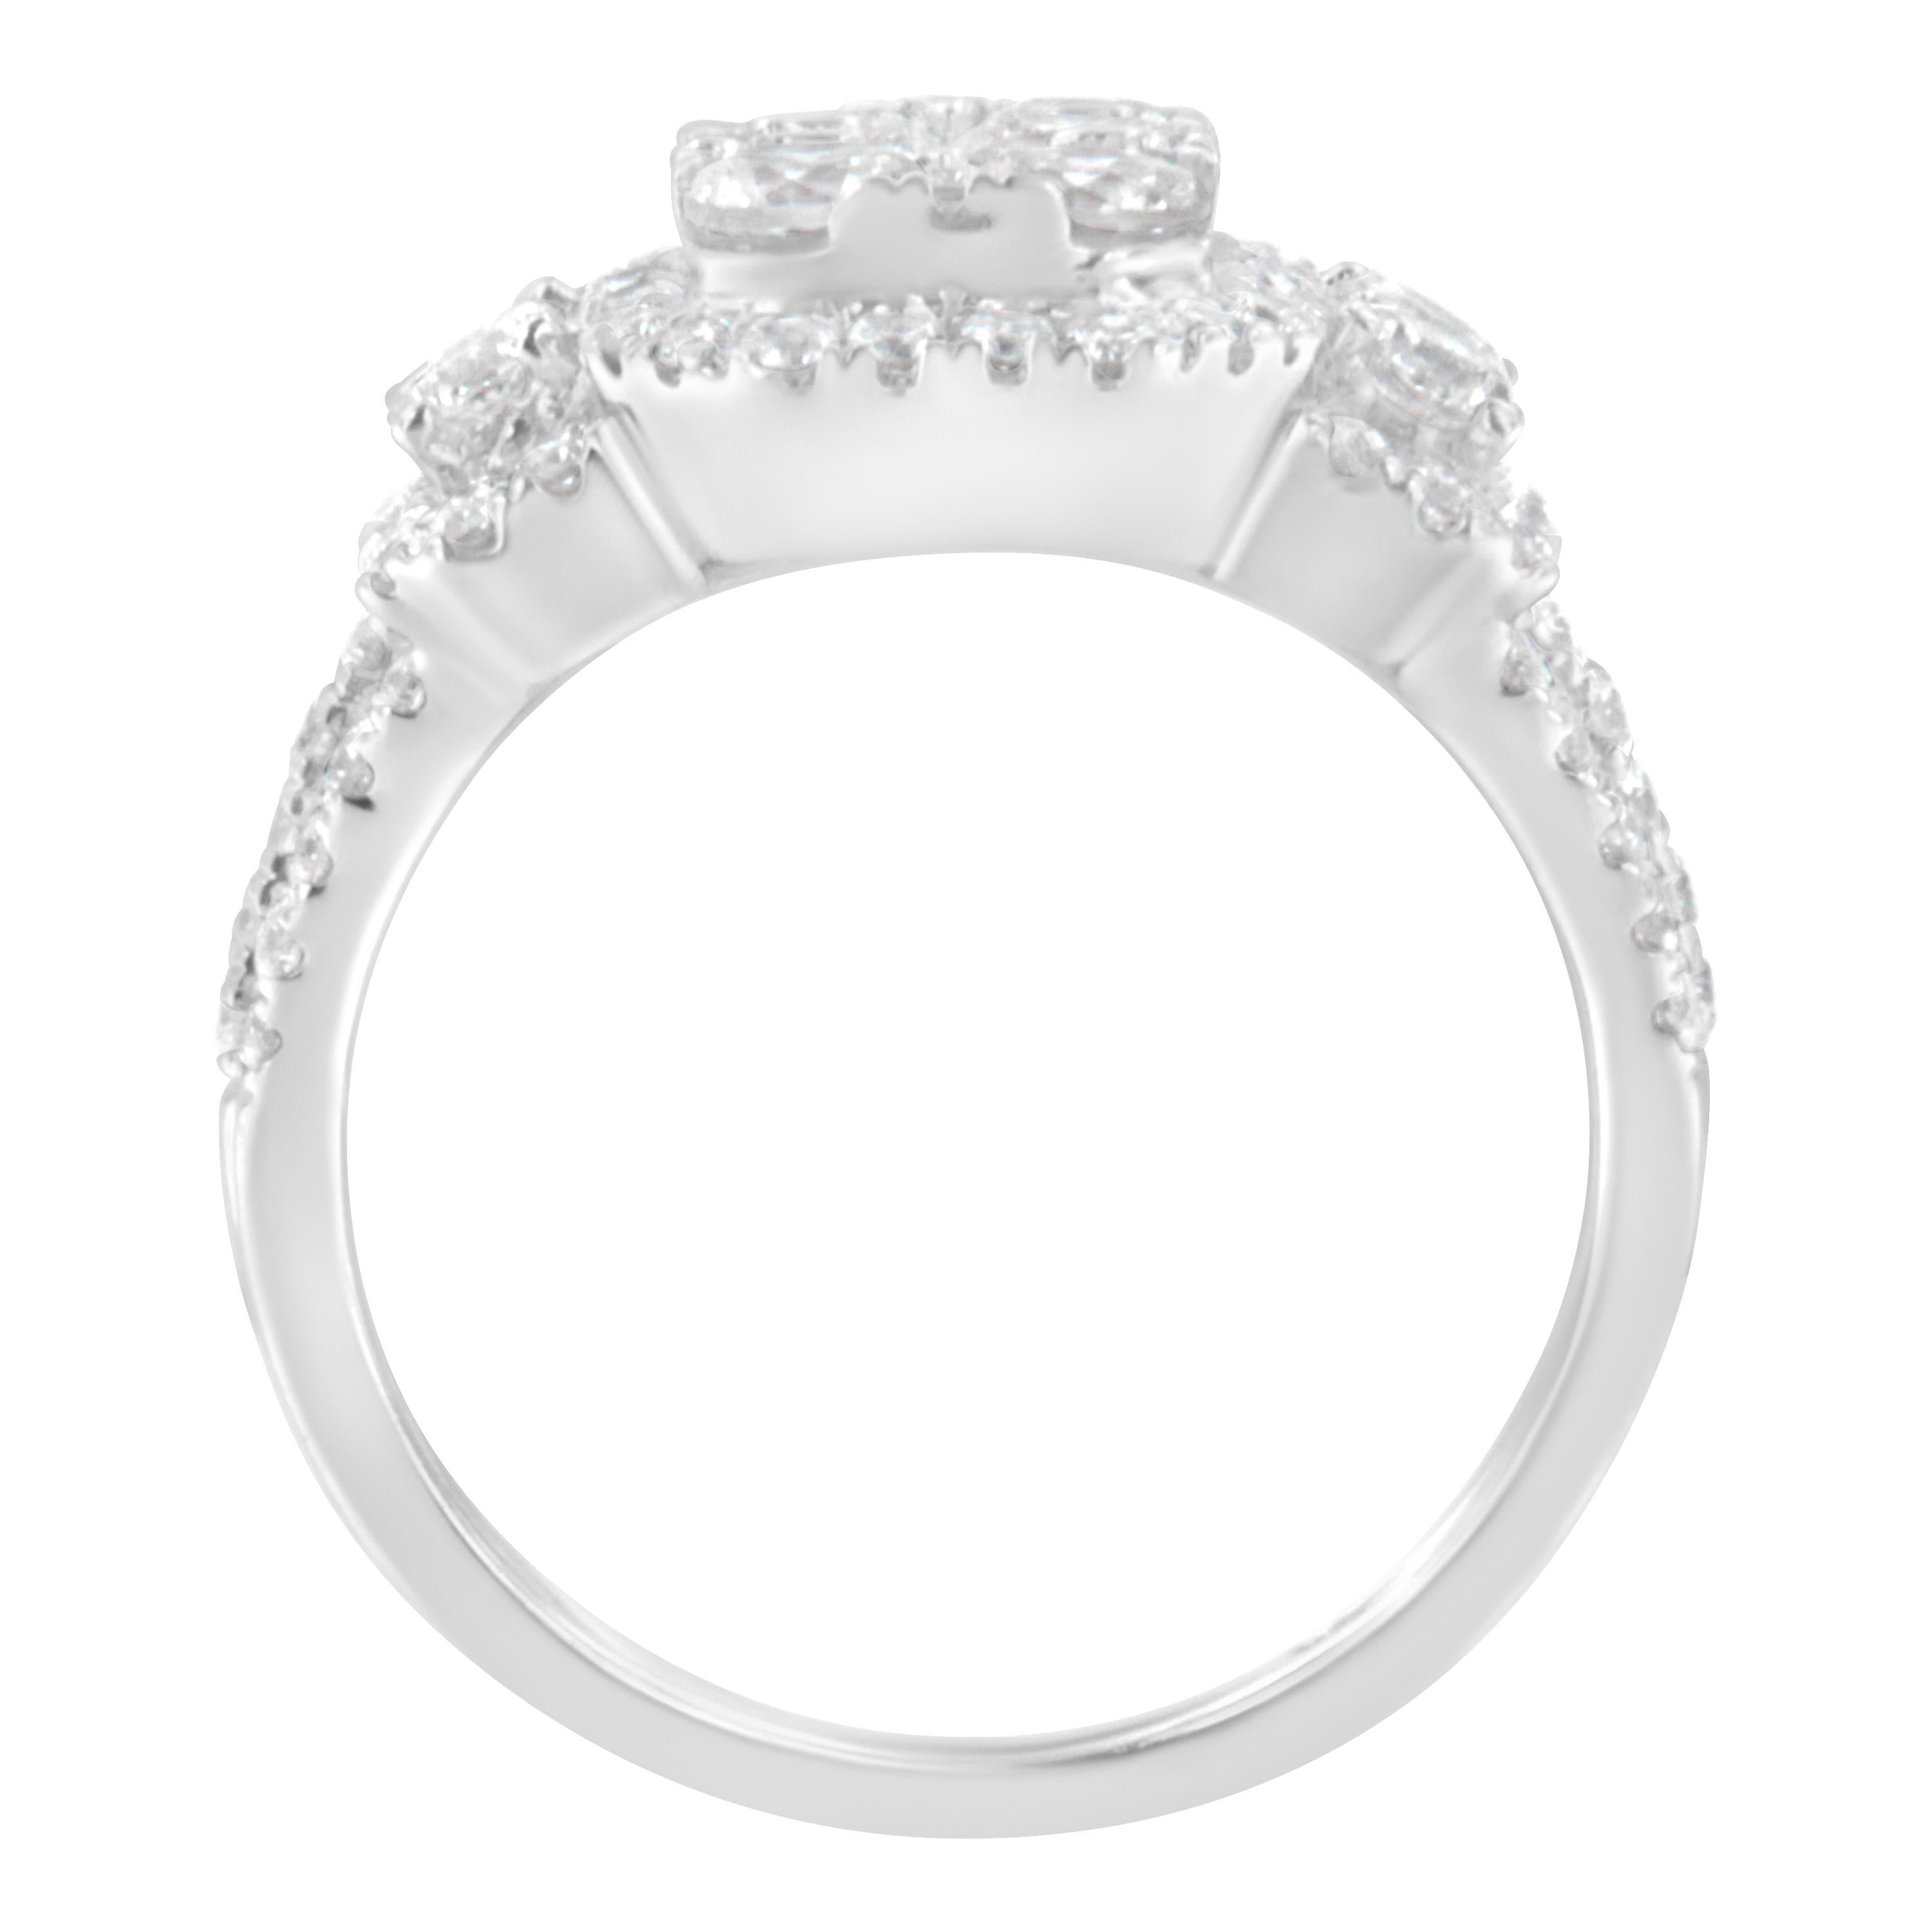 Feel like a beauty queen by wearing this glimmering and highly wonderful diamond ring. Fashioned in 14k white gold, this fashion rings is framed to prong setting of sparkling round-cut diamonds. Making your lady love happy will become easier with